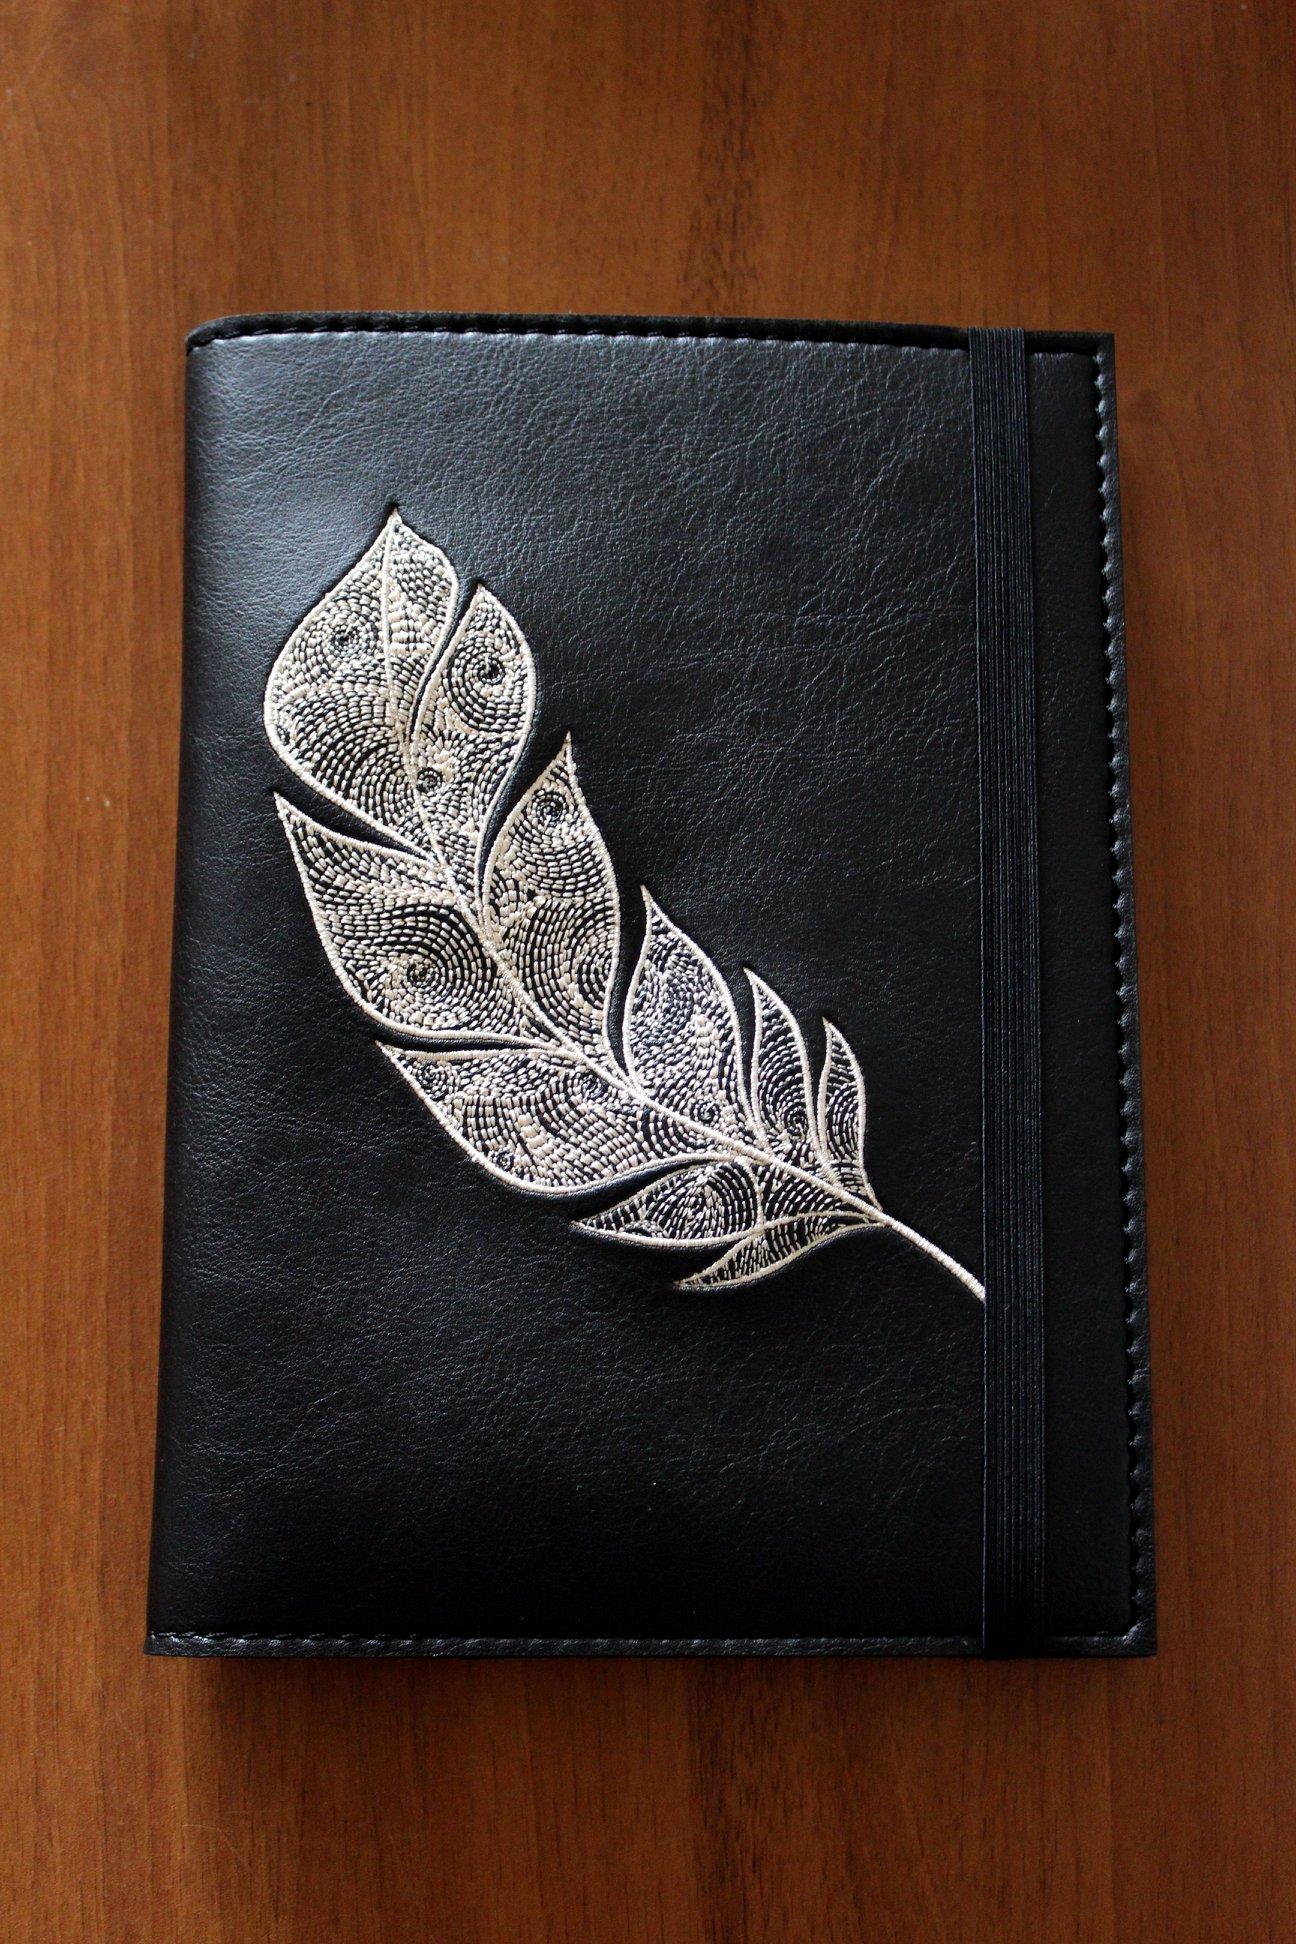 Embroidered cover with Feather design